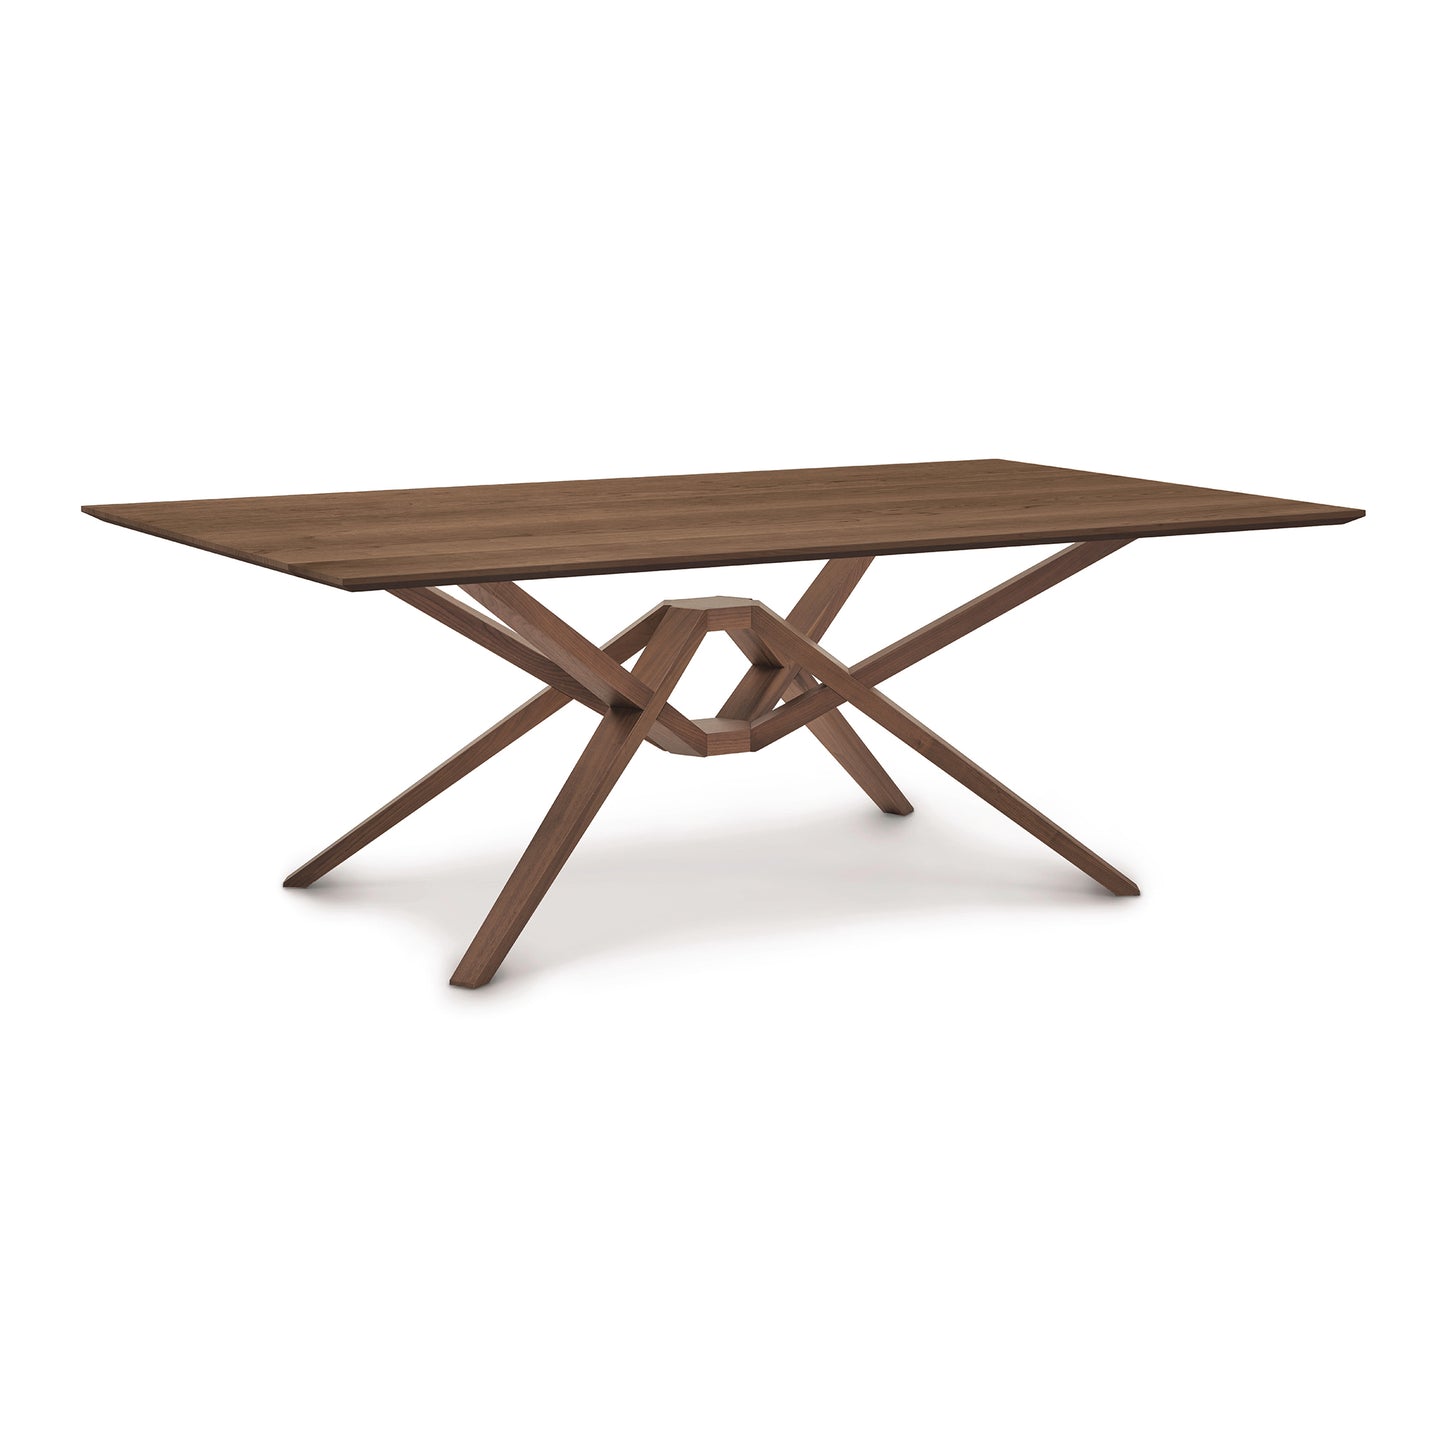 An Exeter Solid Top Dining Table by Copeland Furniture, featuring a unique crossed-leg design and crafted from sustainably harvested solid North American hardwood, set against a white background.